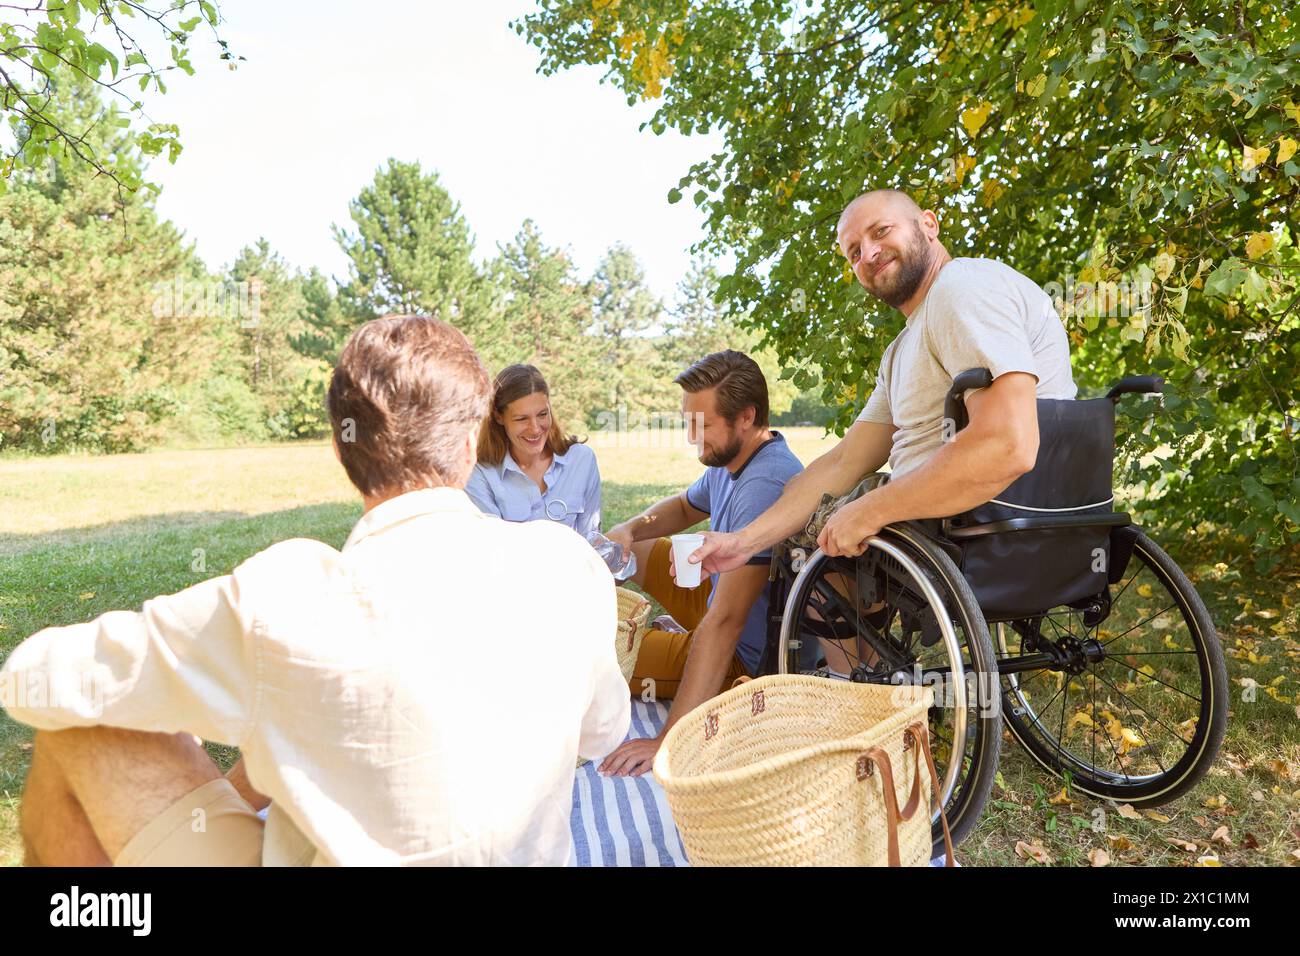 A cheerful outdoor scene where friends gather, including a person in a wheelchair, sharing laughs and conversation under the shade of green trees. Stock Photo